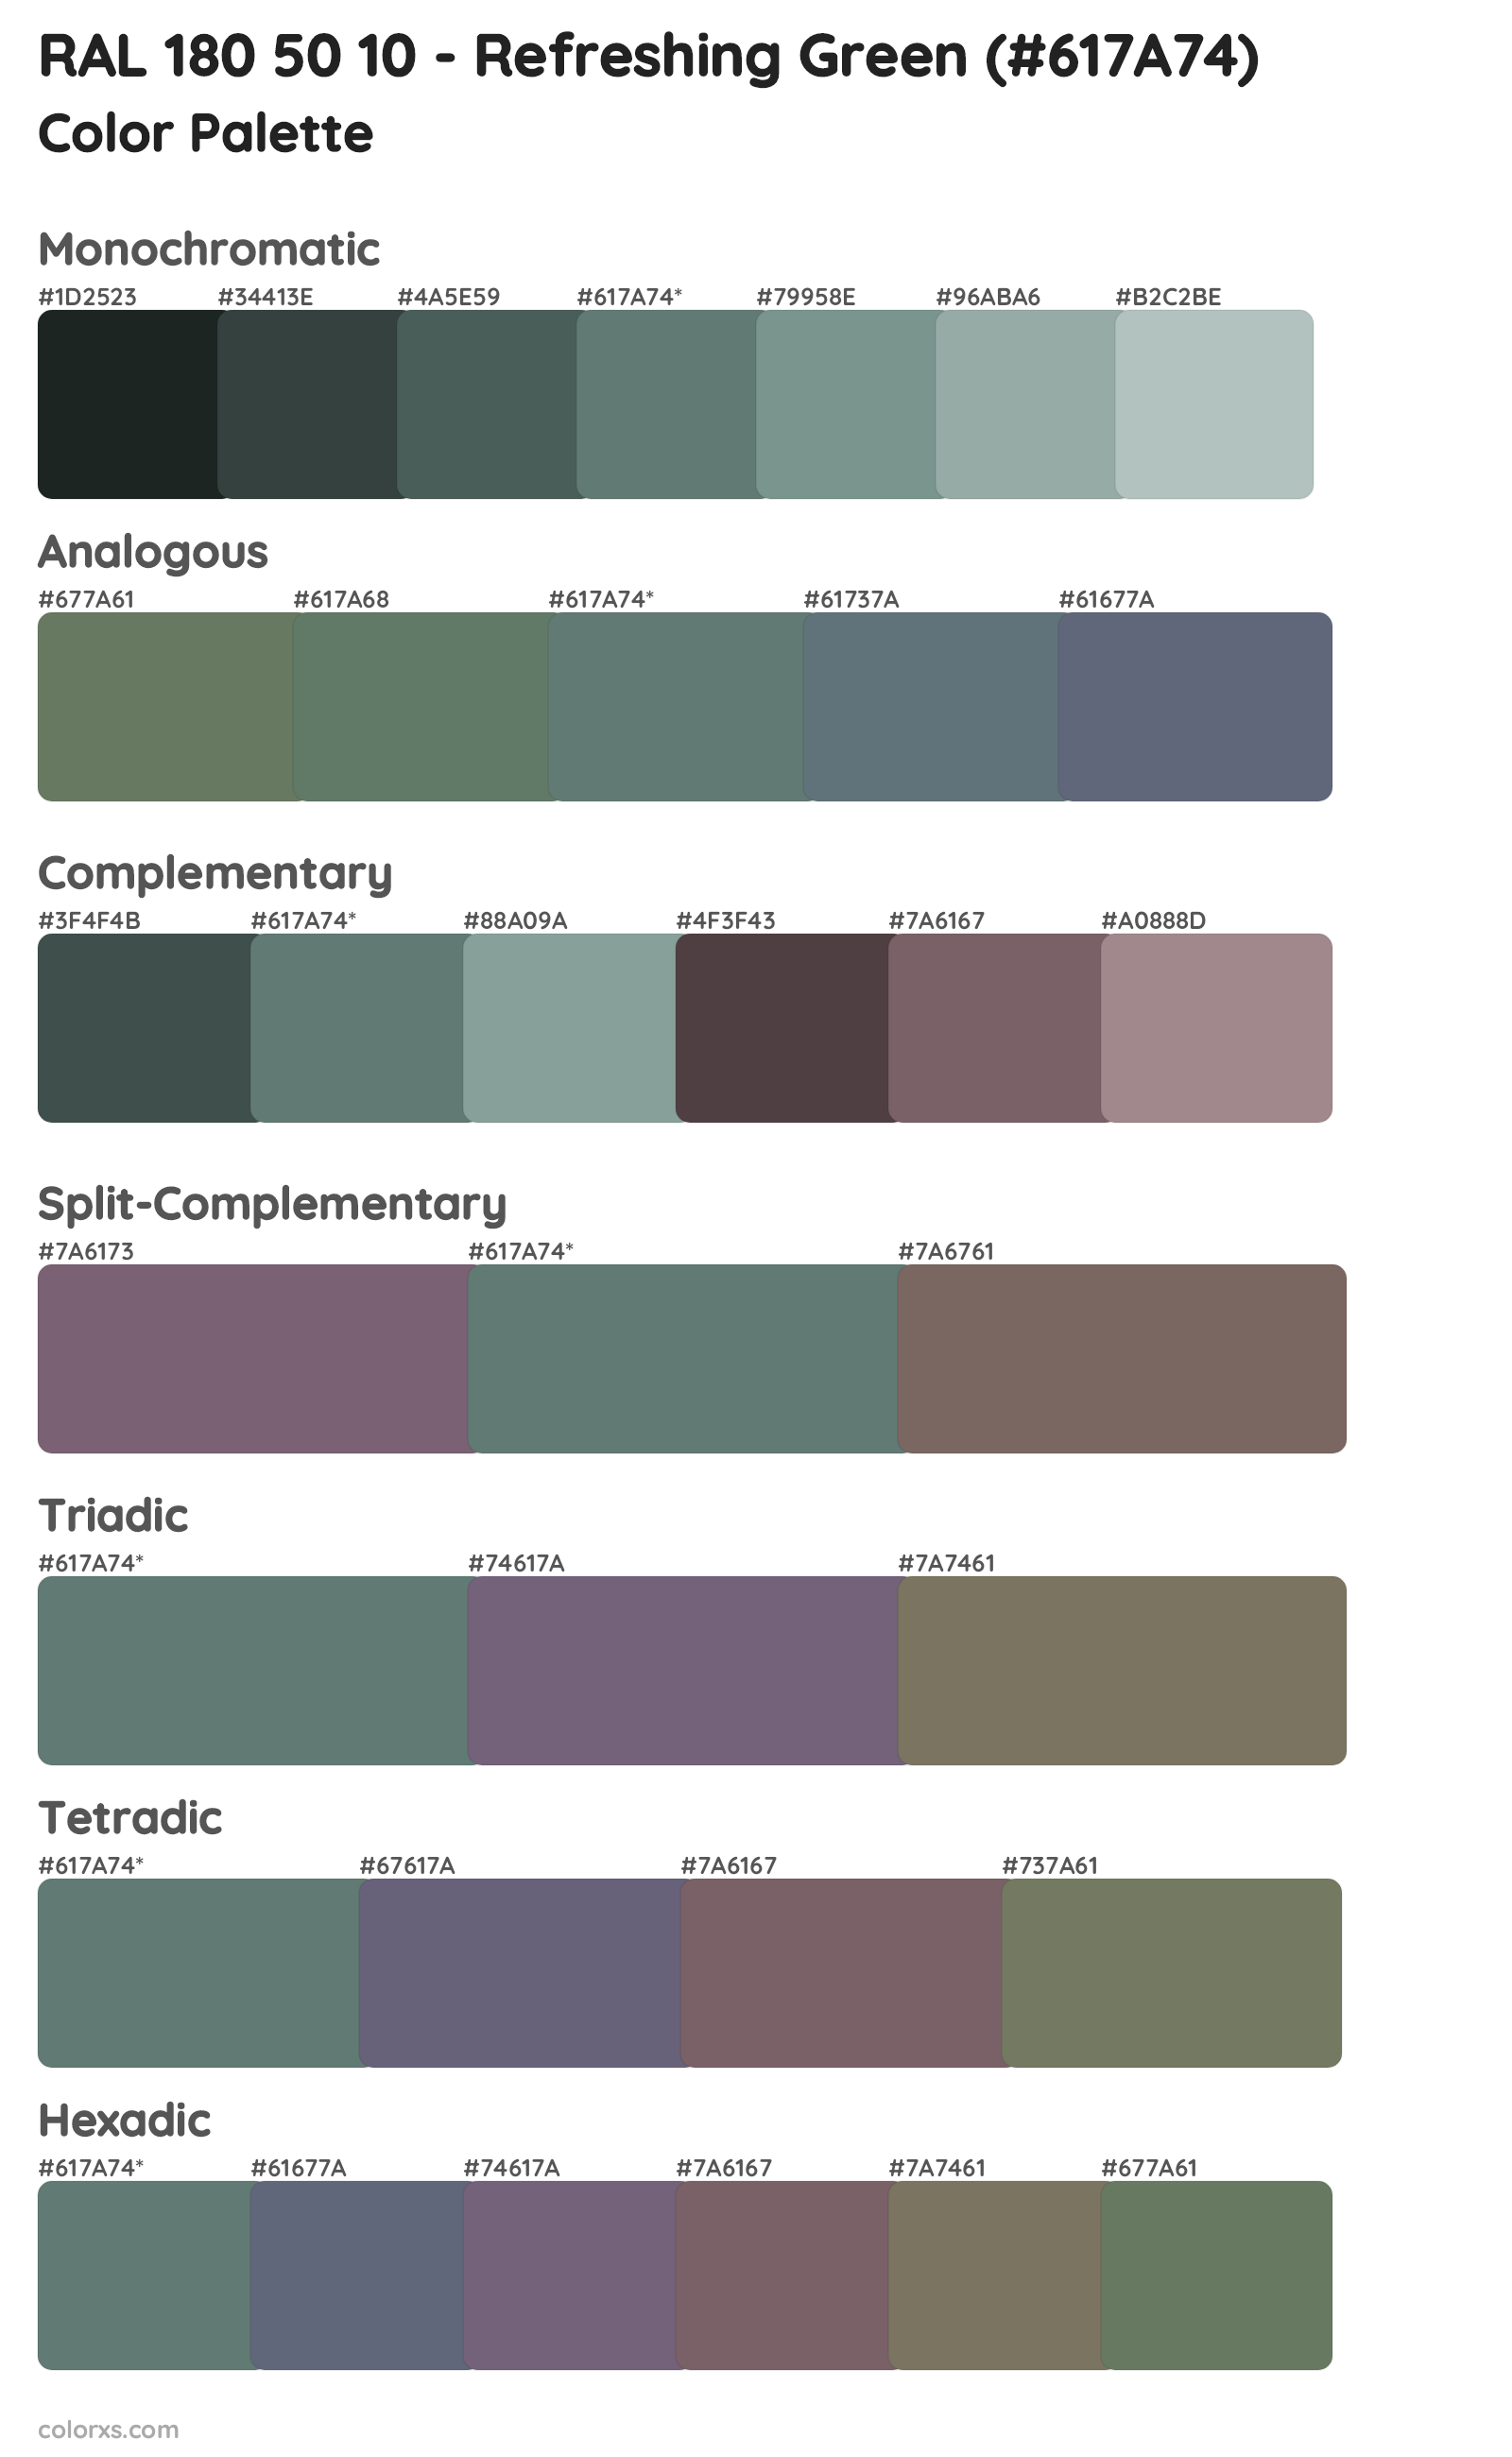 RAL 180 50 10 - Refreshing Green Color Scheme Palettes